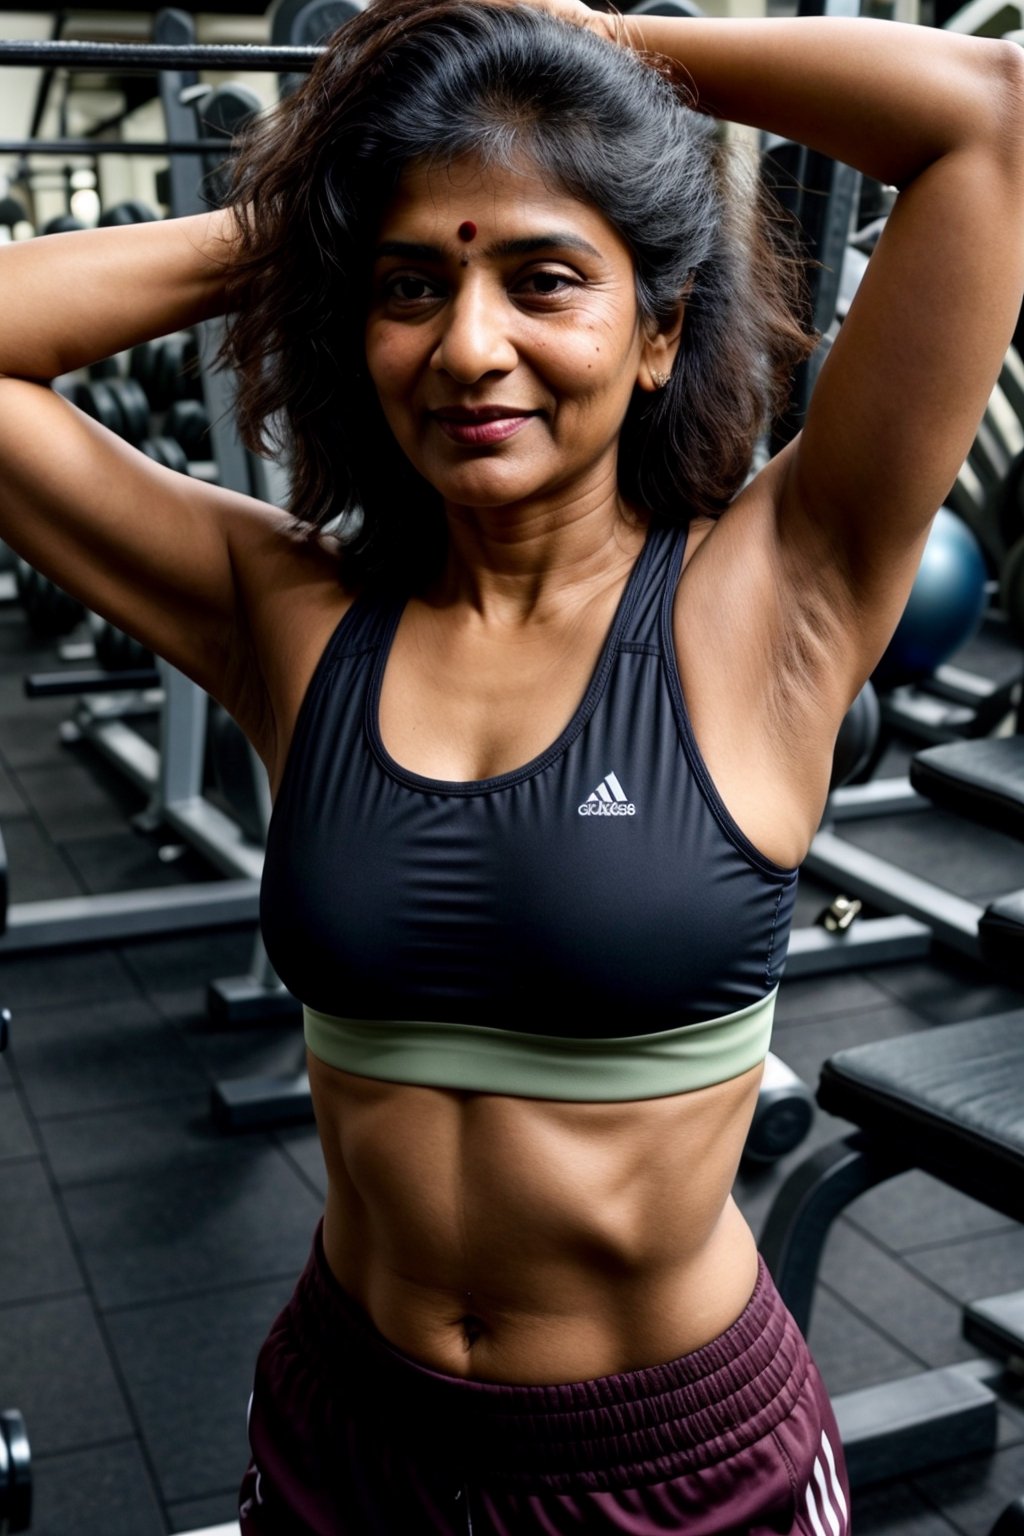 Fit Indian Woman with Athletic Build - LimeWire